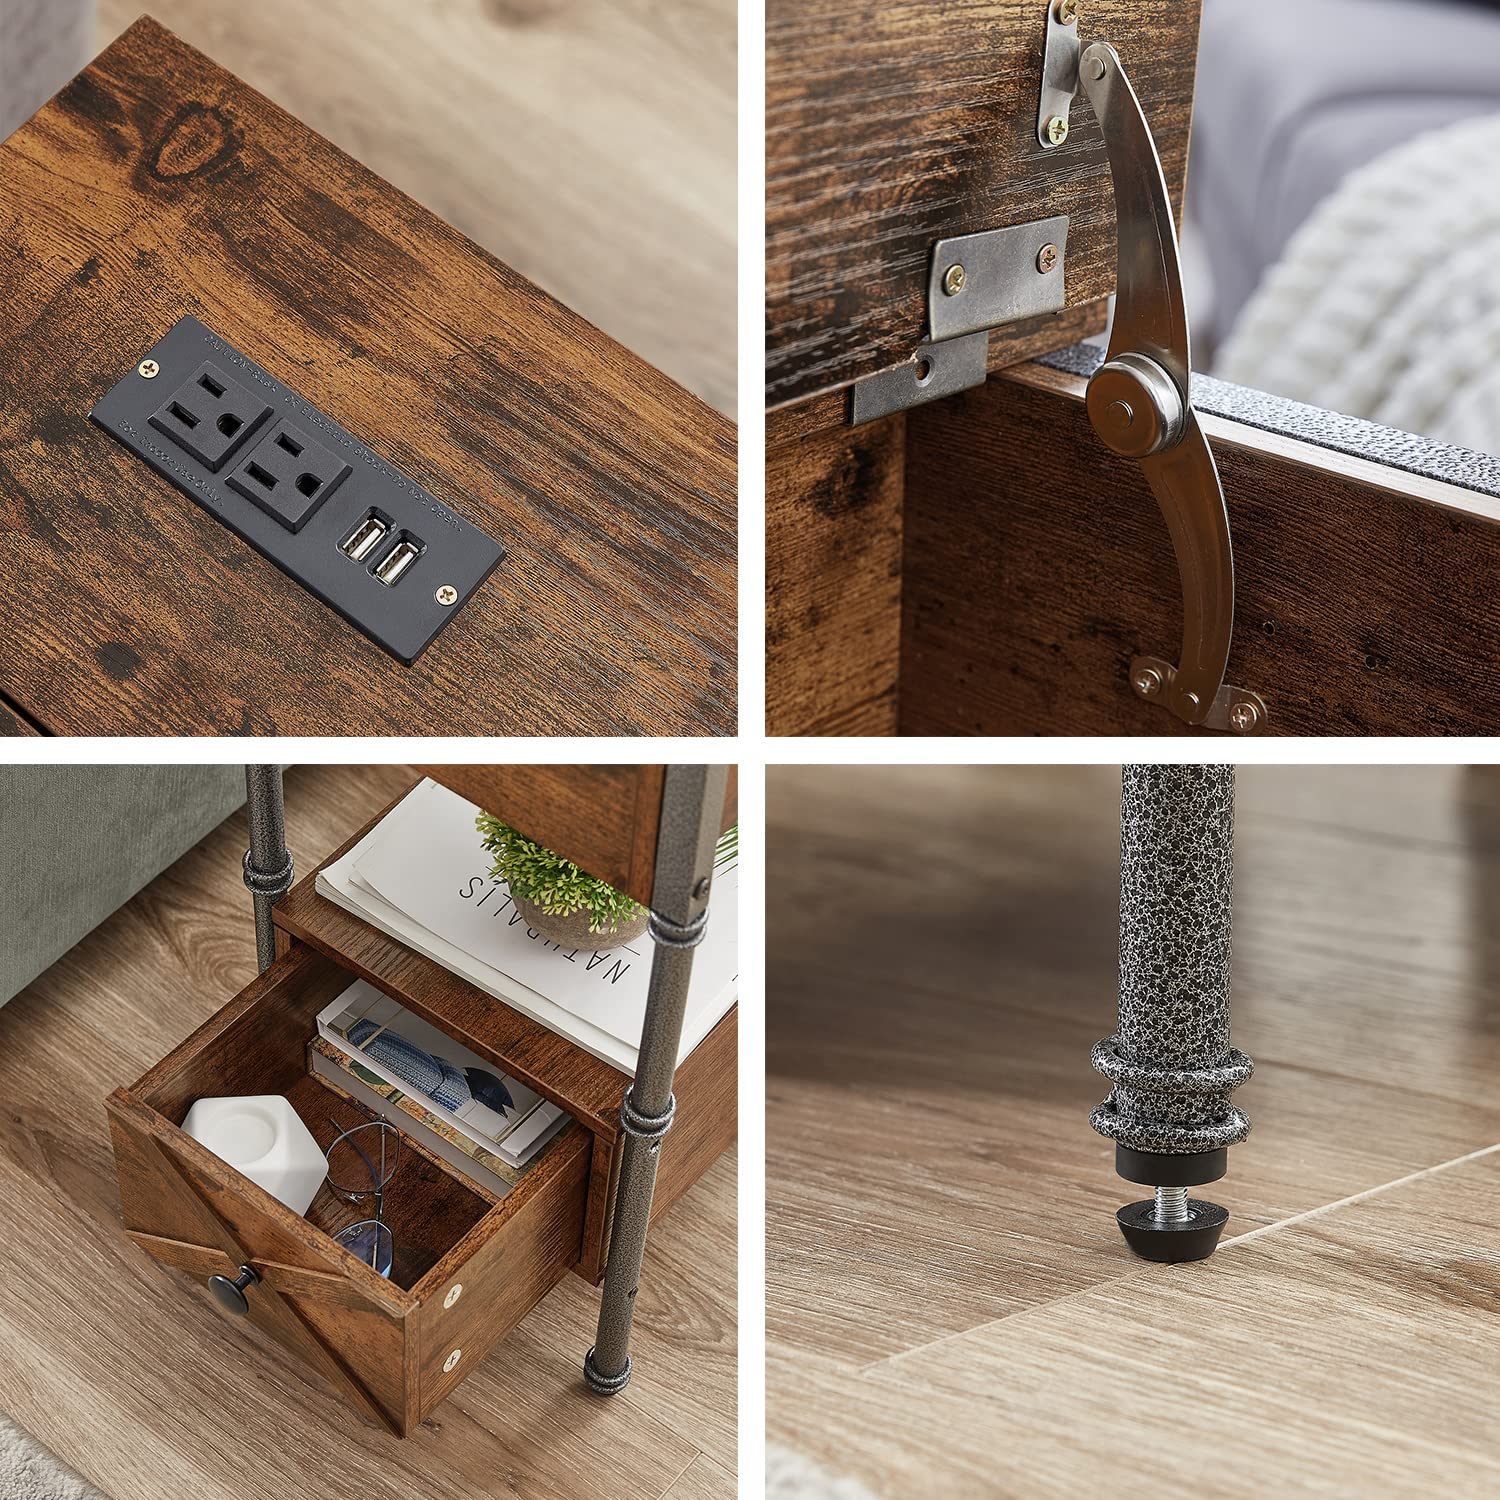 End Table with USB Charging Station